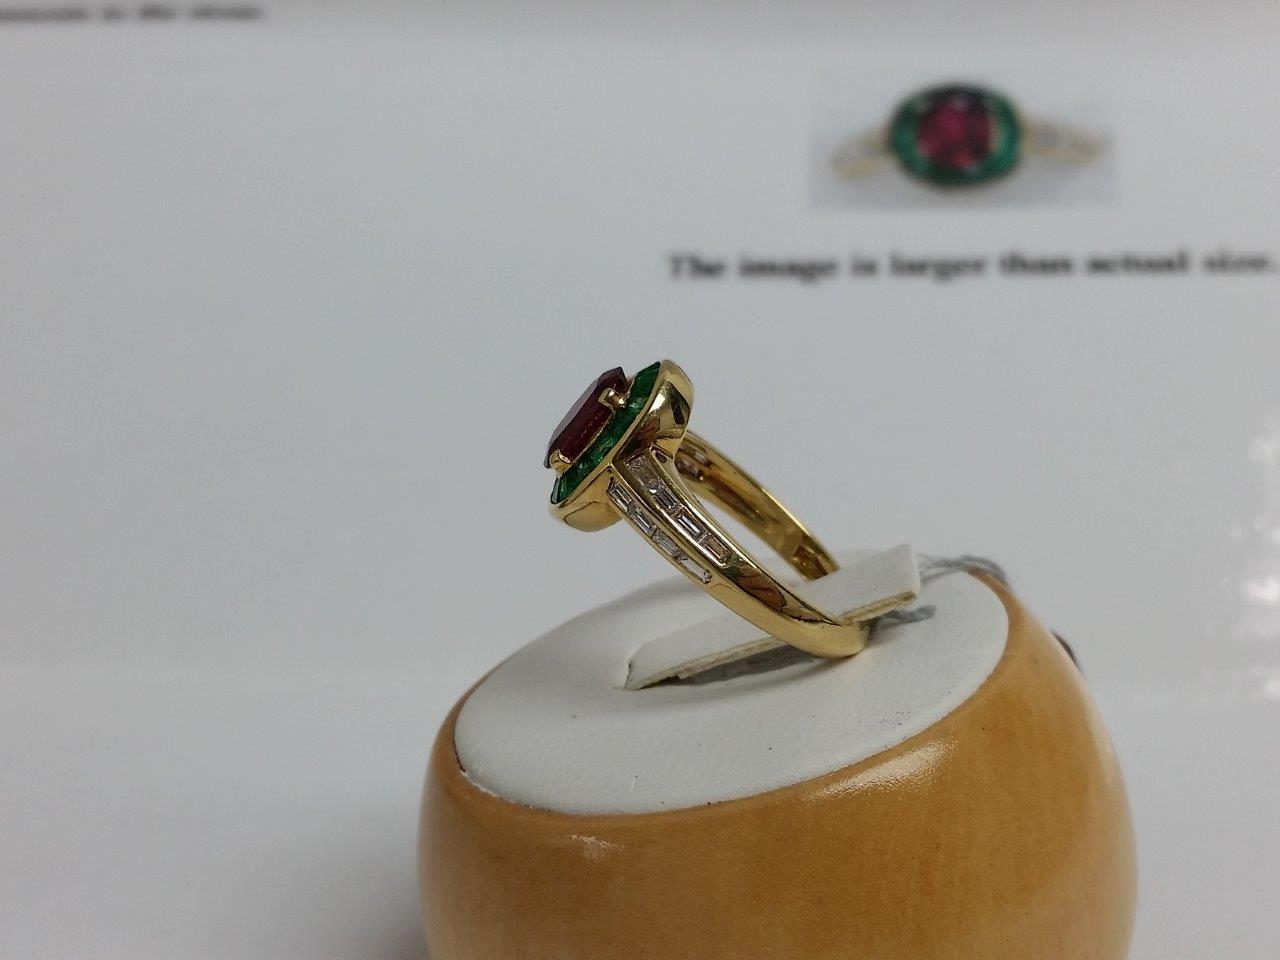 Ladies 18k Yellow Gold Ring w/ Diamonds-Emeralds Natural Oval Ruby